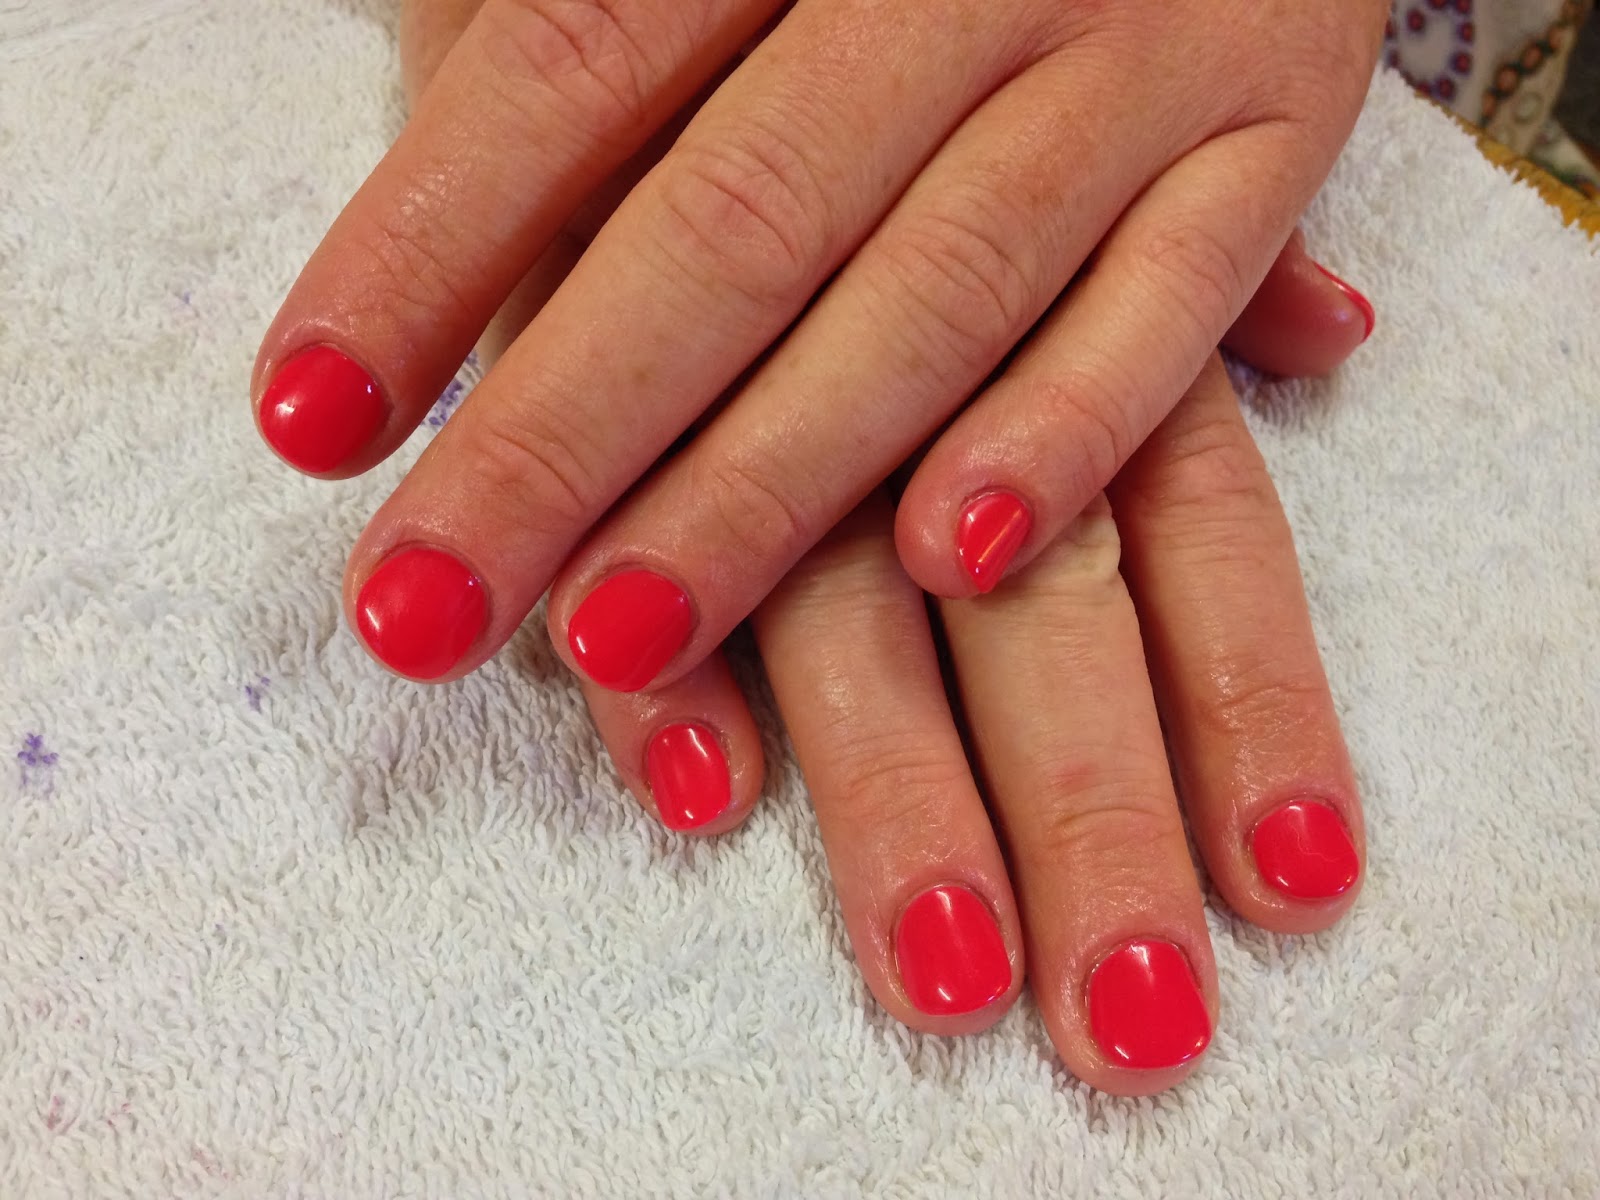 10. "CND Vinylux in Lobster Roll" - wide 3